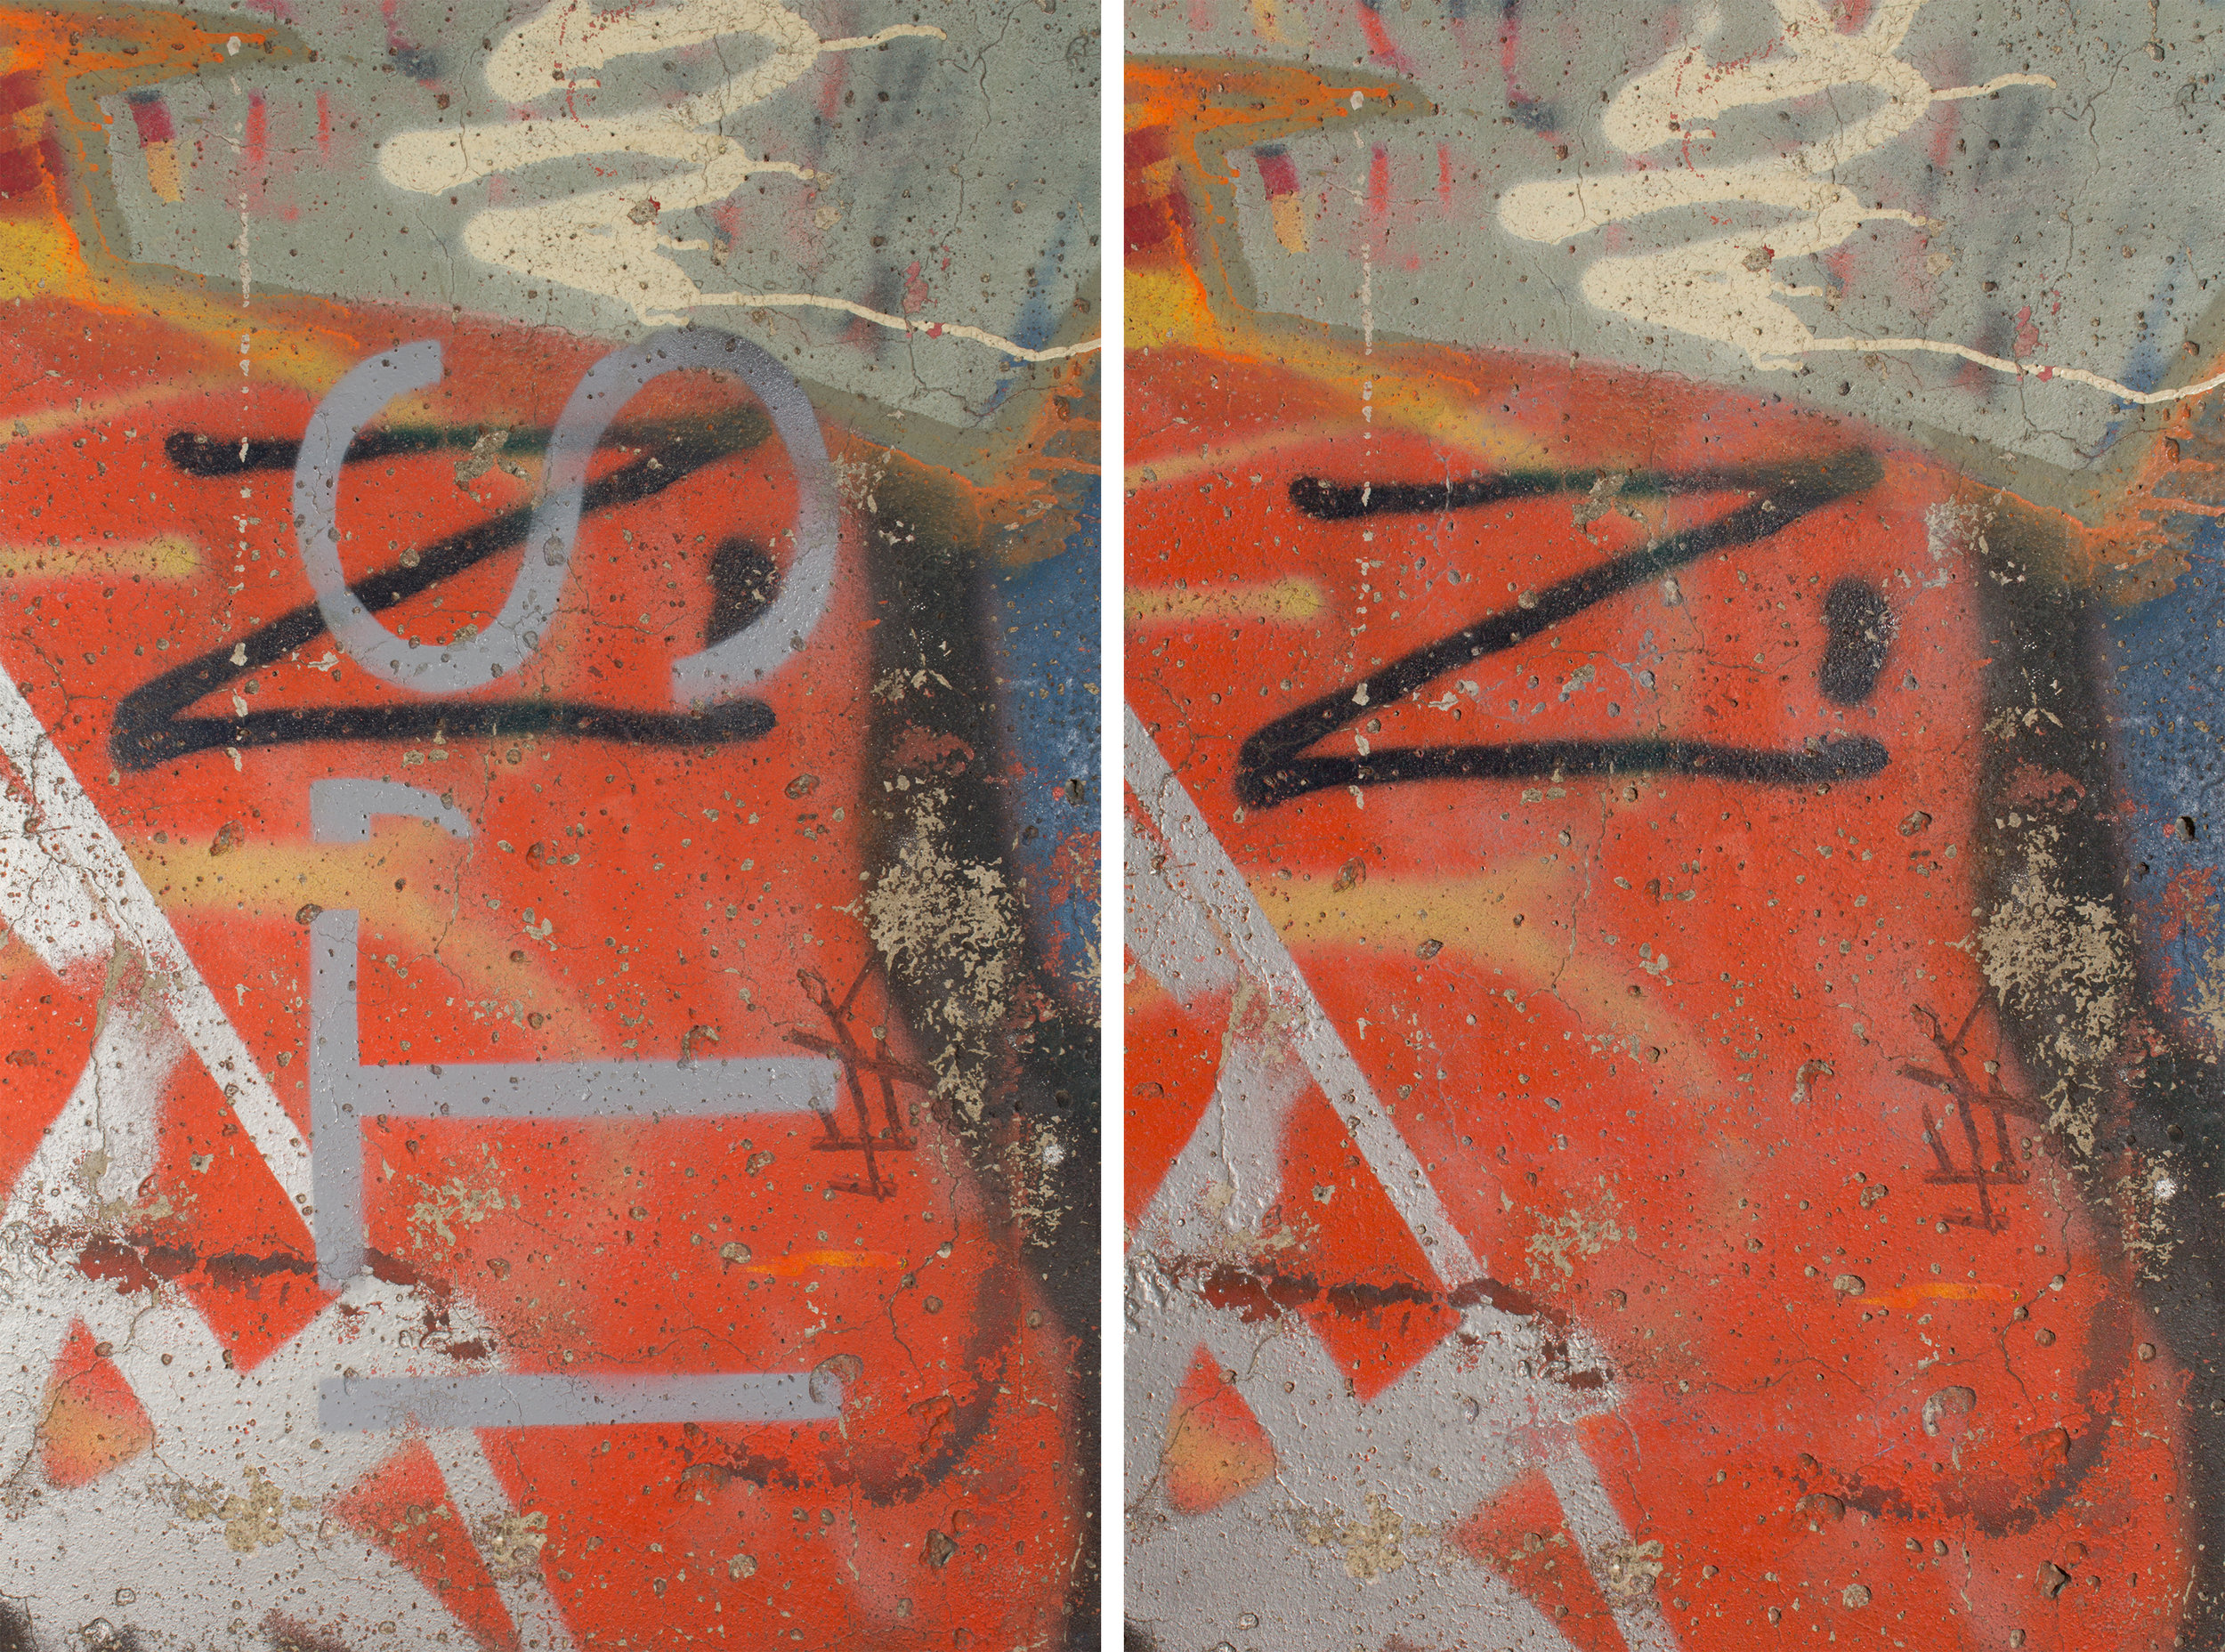  Removal of the 2014 graffiti was extremely successful.&nbsp;Results of removal: Before (left), After (right).&nbsp;    
  
 
  
    
  
 Normal 
 0 
 
 
 
 
 false 
 false 
 false 
 
 EN-US 
 JA 
 X-NONE 
 
  
  
  
  
  
  
  
  
  
  
 
 
  
  
  